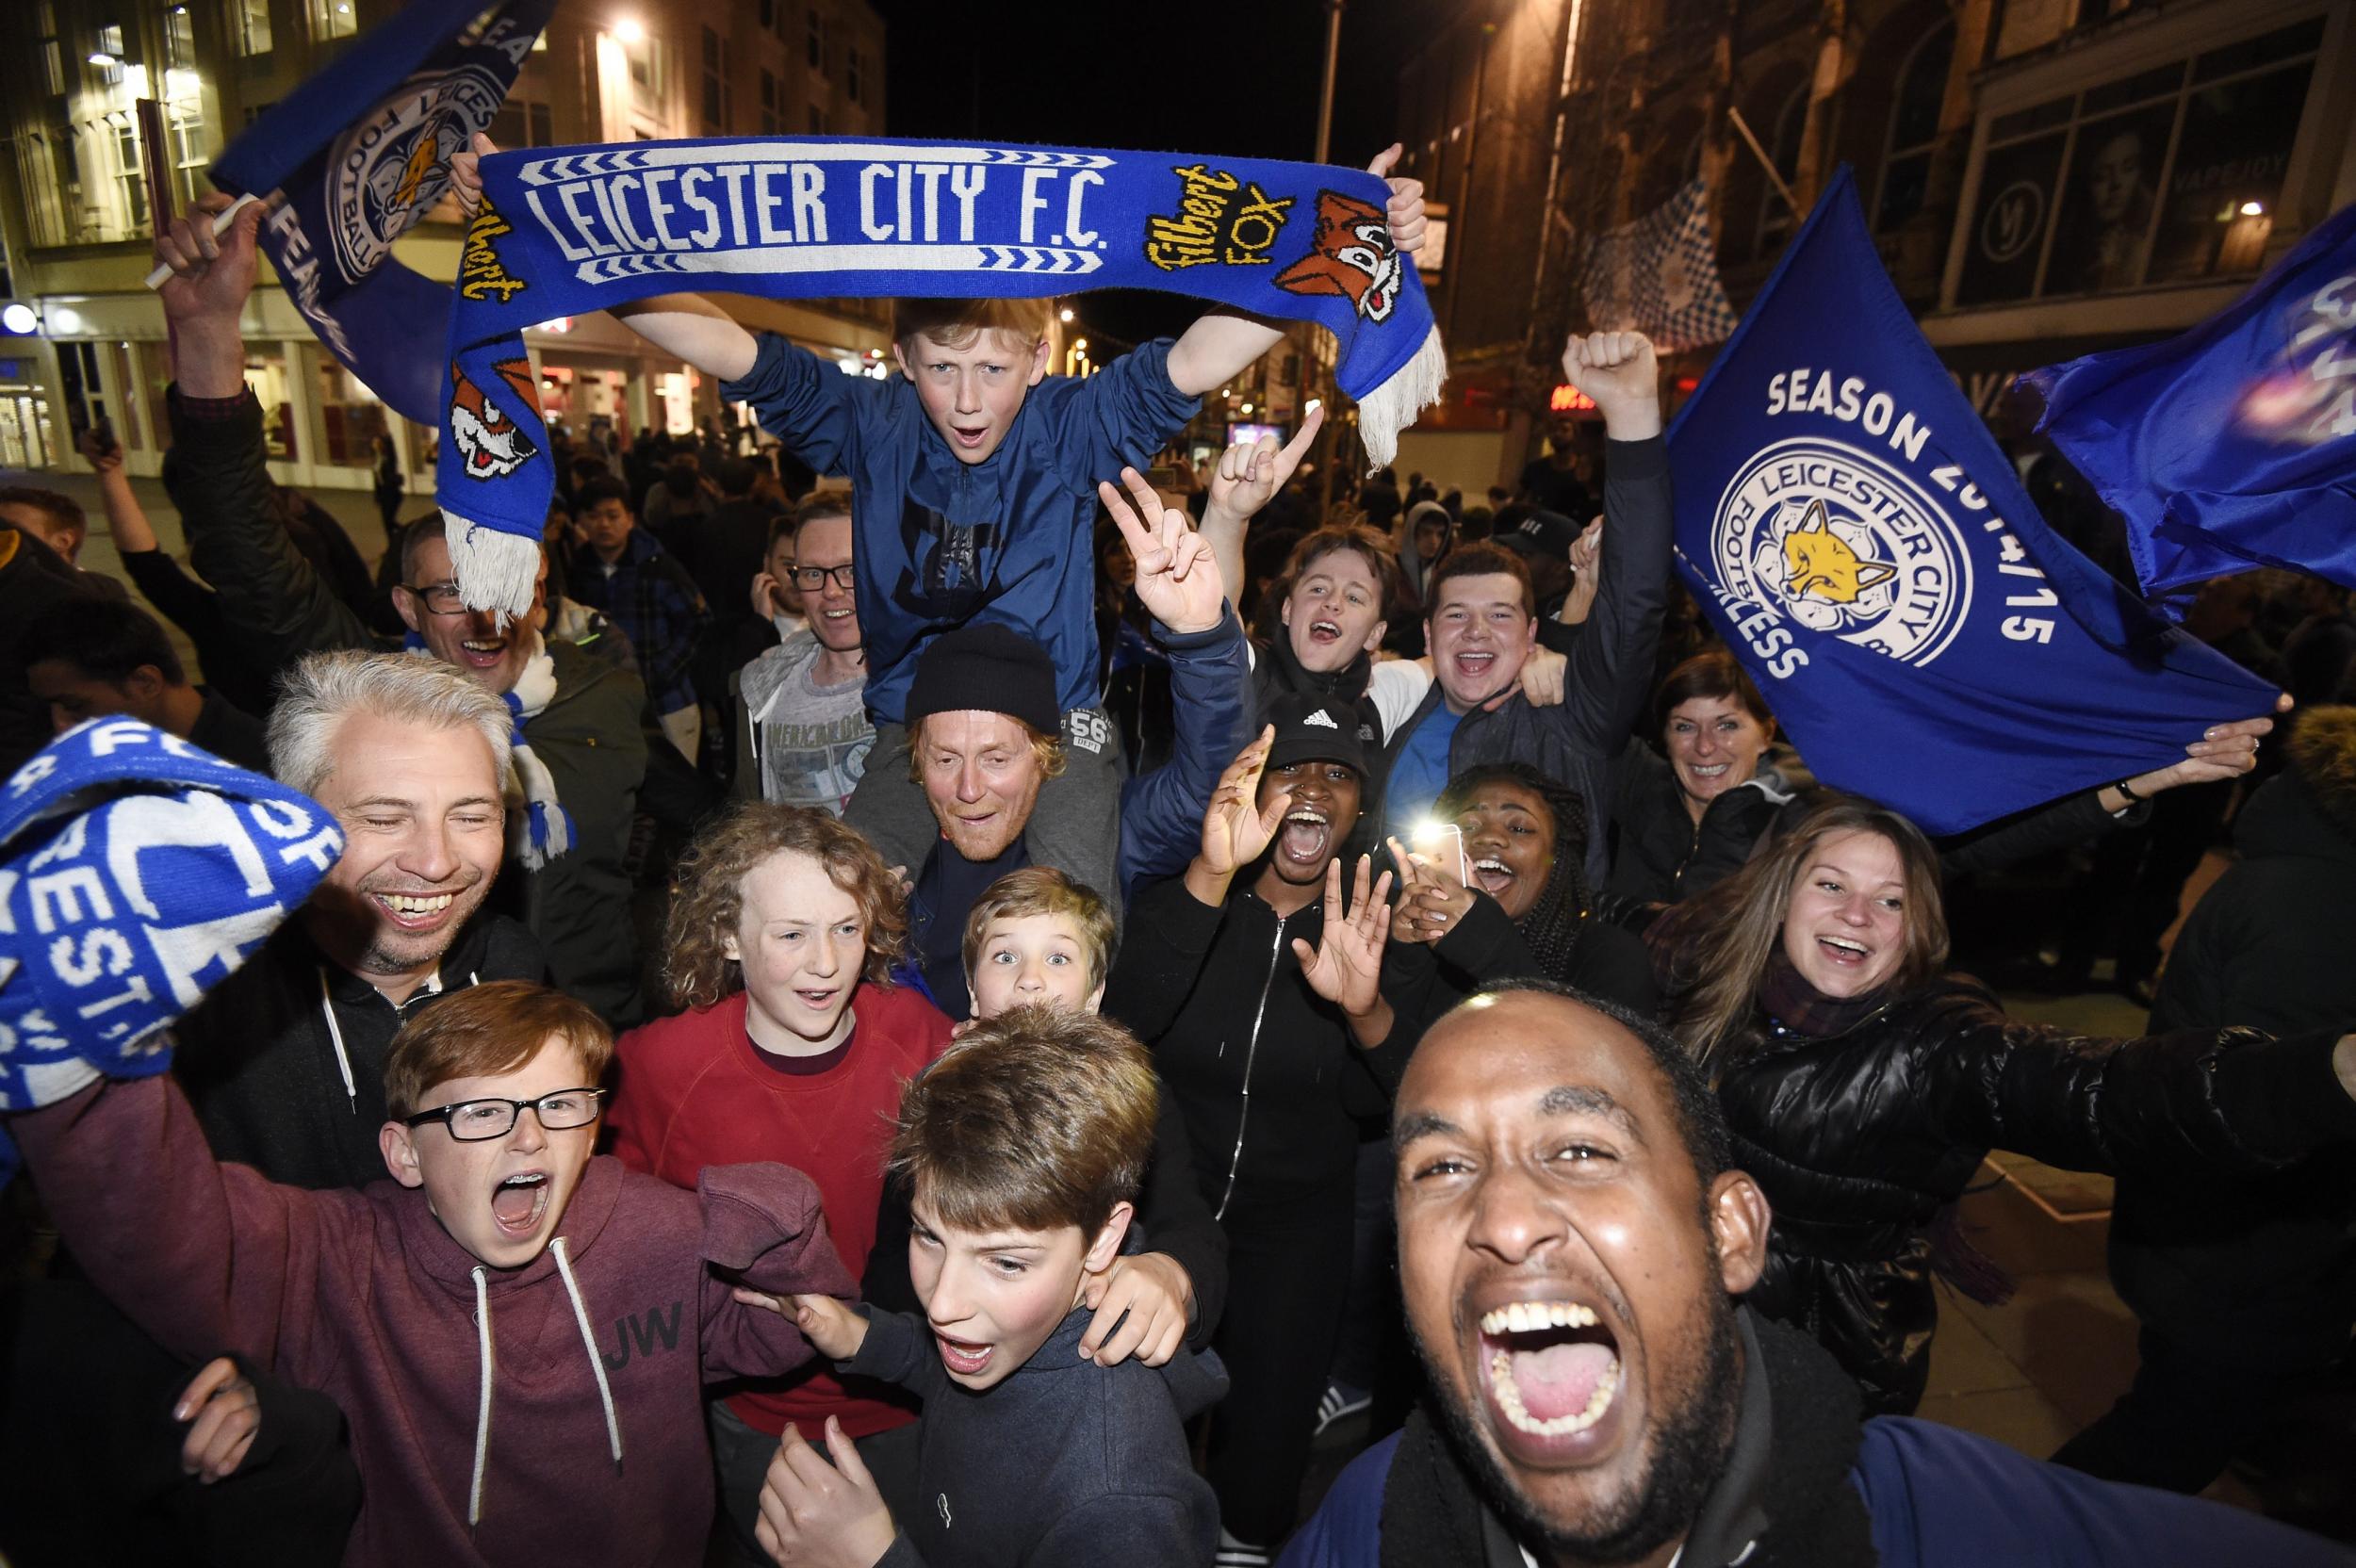 Leicester City supporters celebrate at the city's Haymarket Memorial Clock Tower